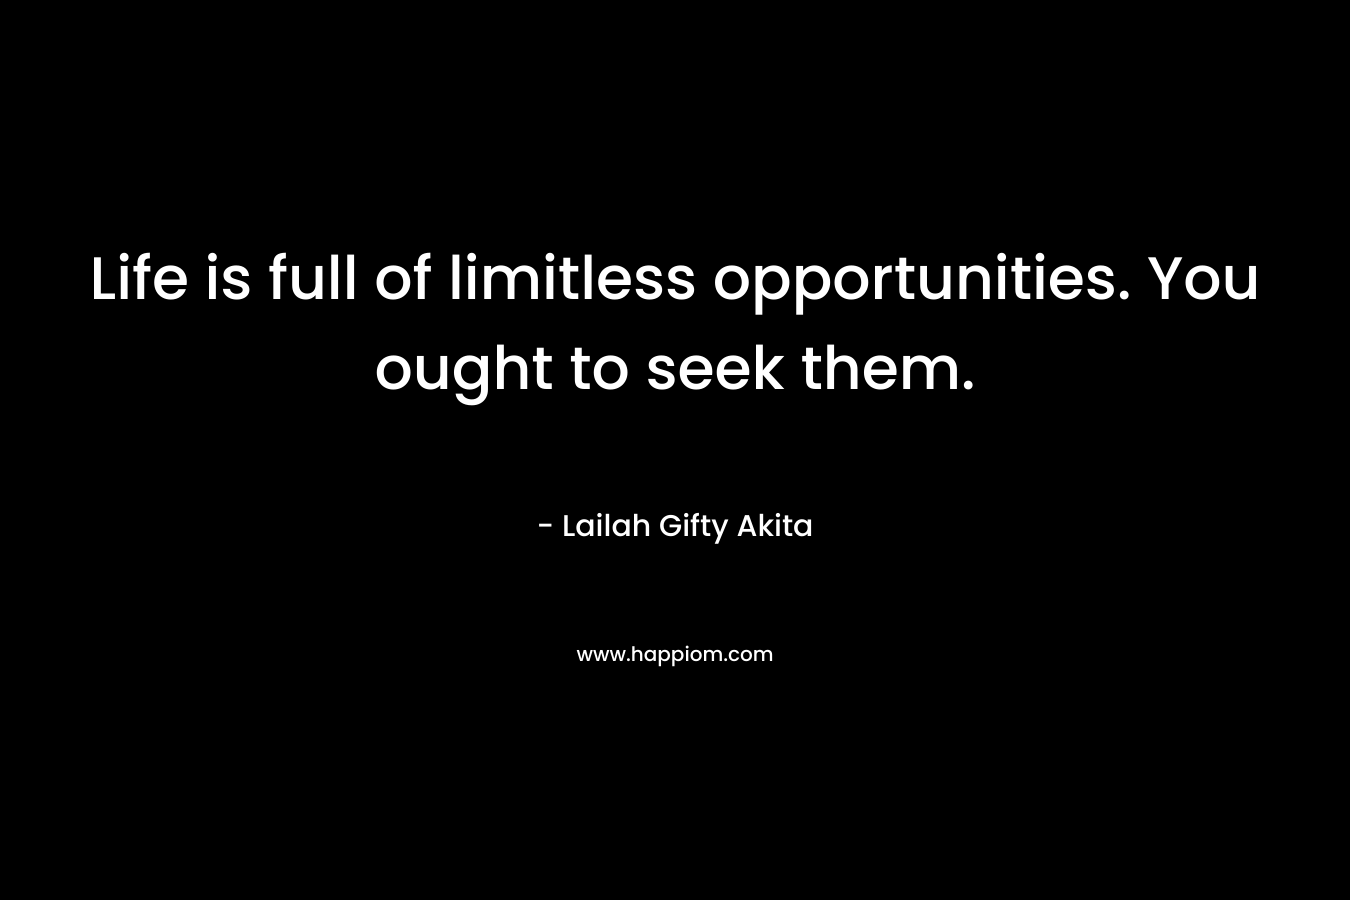 Life is full of limitless opportunities. You ought to seek them.